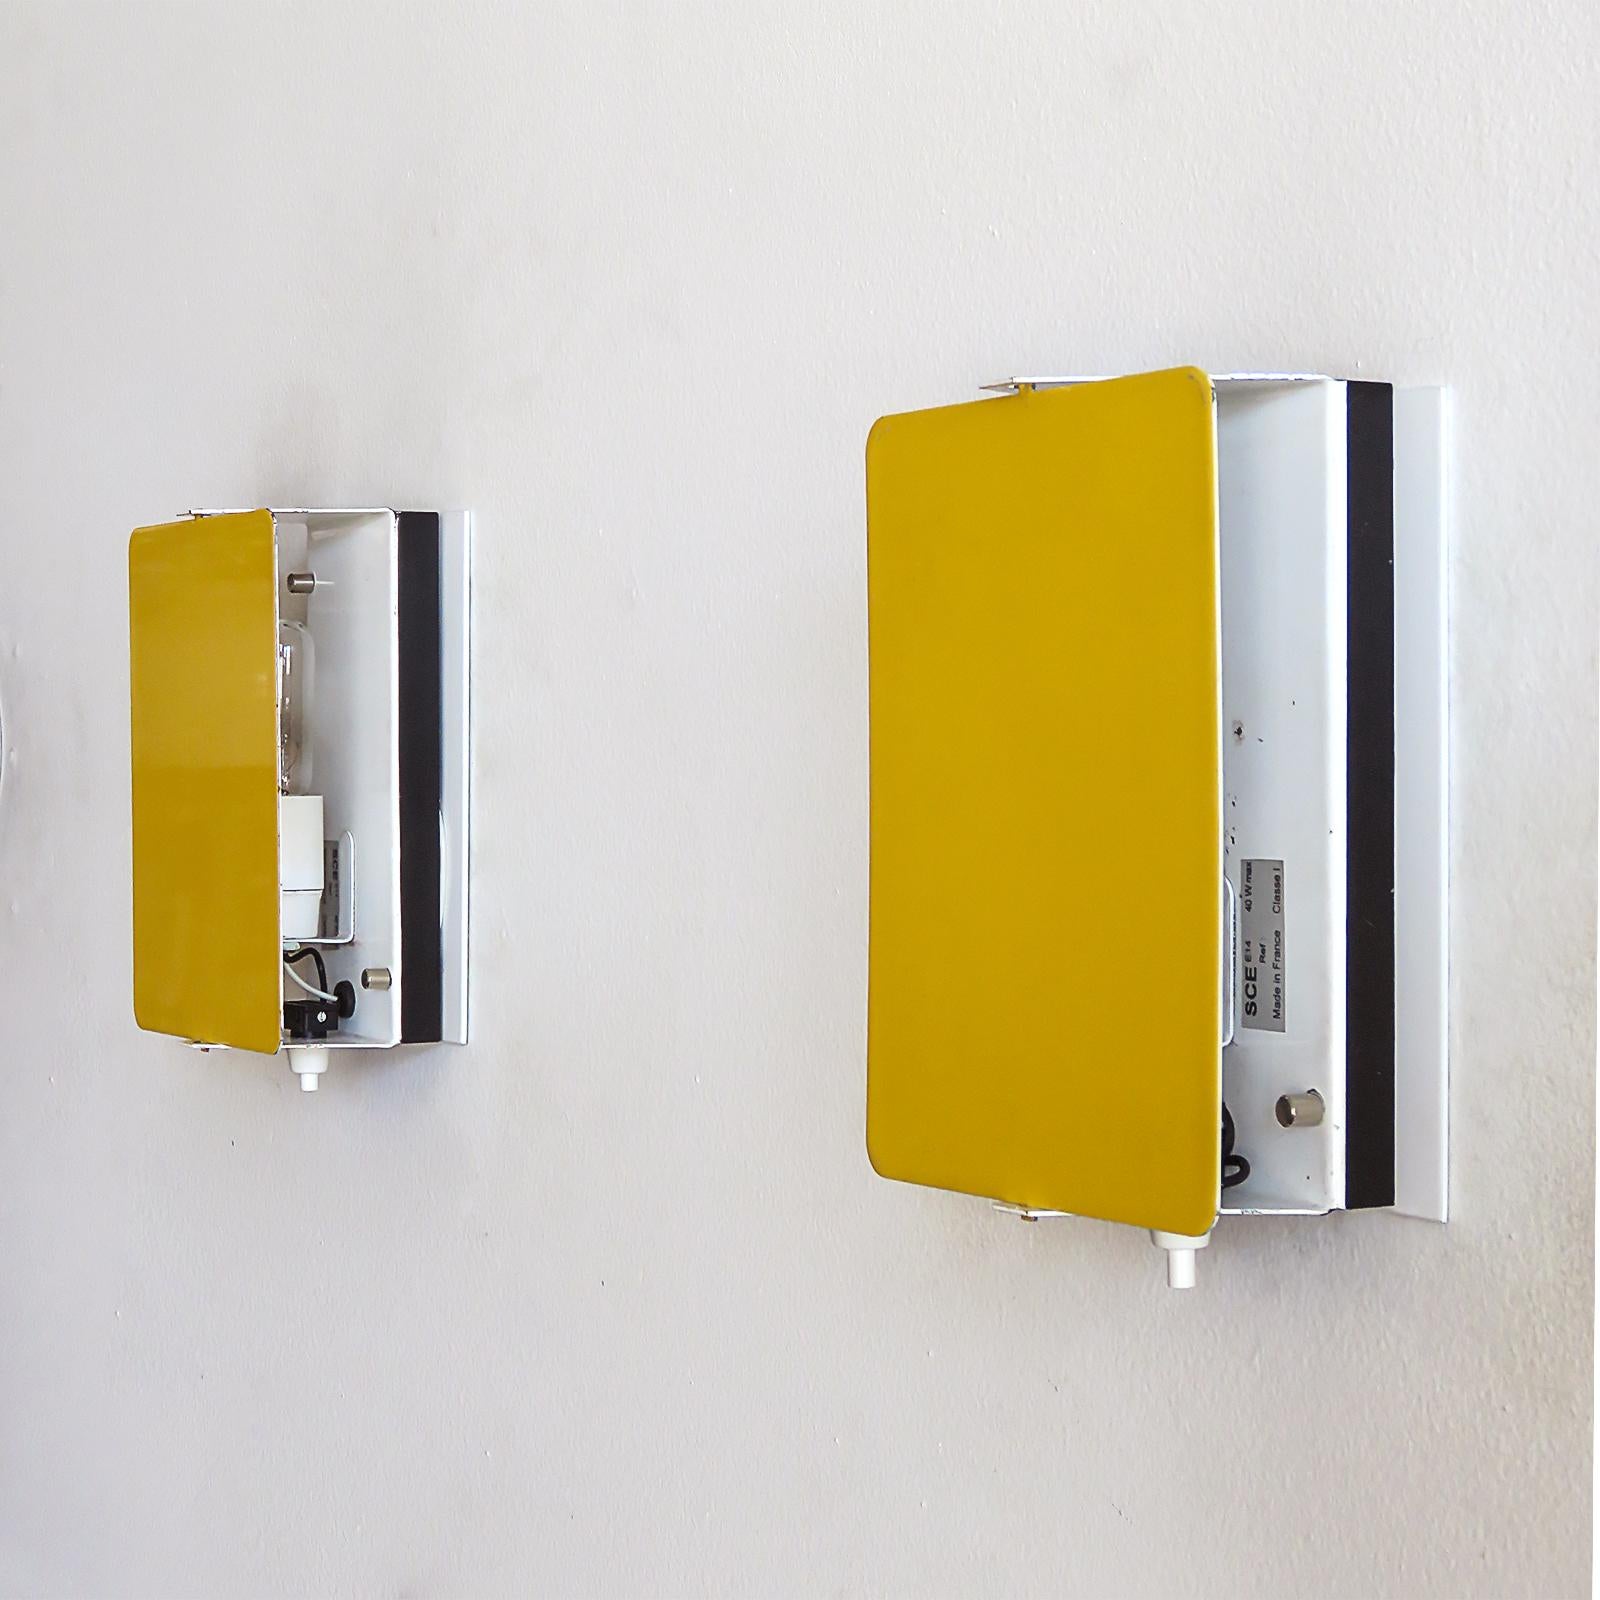 CP-1 Wall Lights by Charlotte Perriand In Good Condition For Sale In Los Angeles, CA